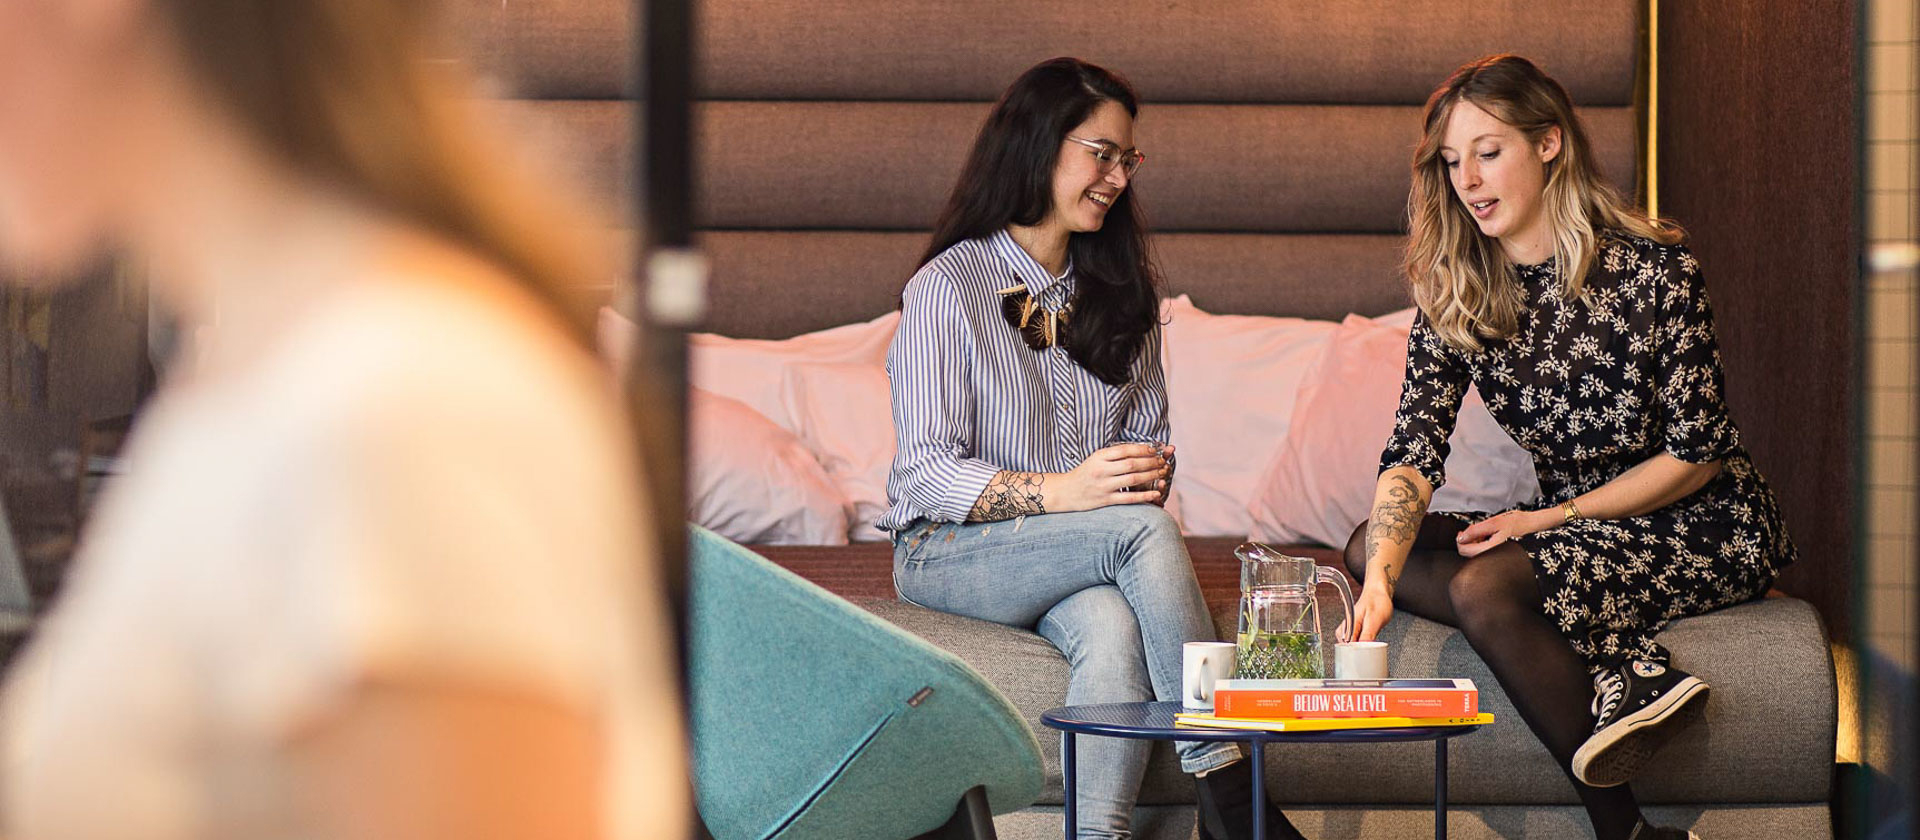 Two women catch up on the bed in the BedTalks meeting space at The Student Hotel Rotterdam